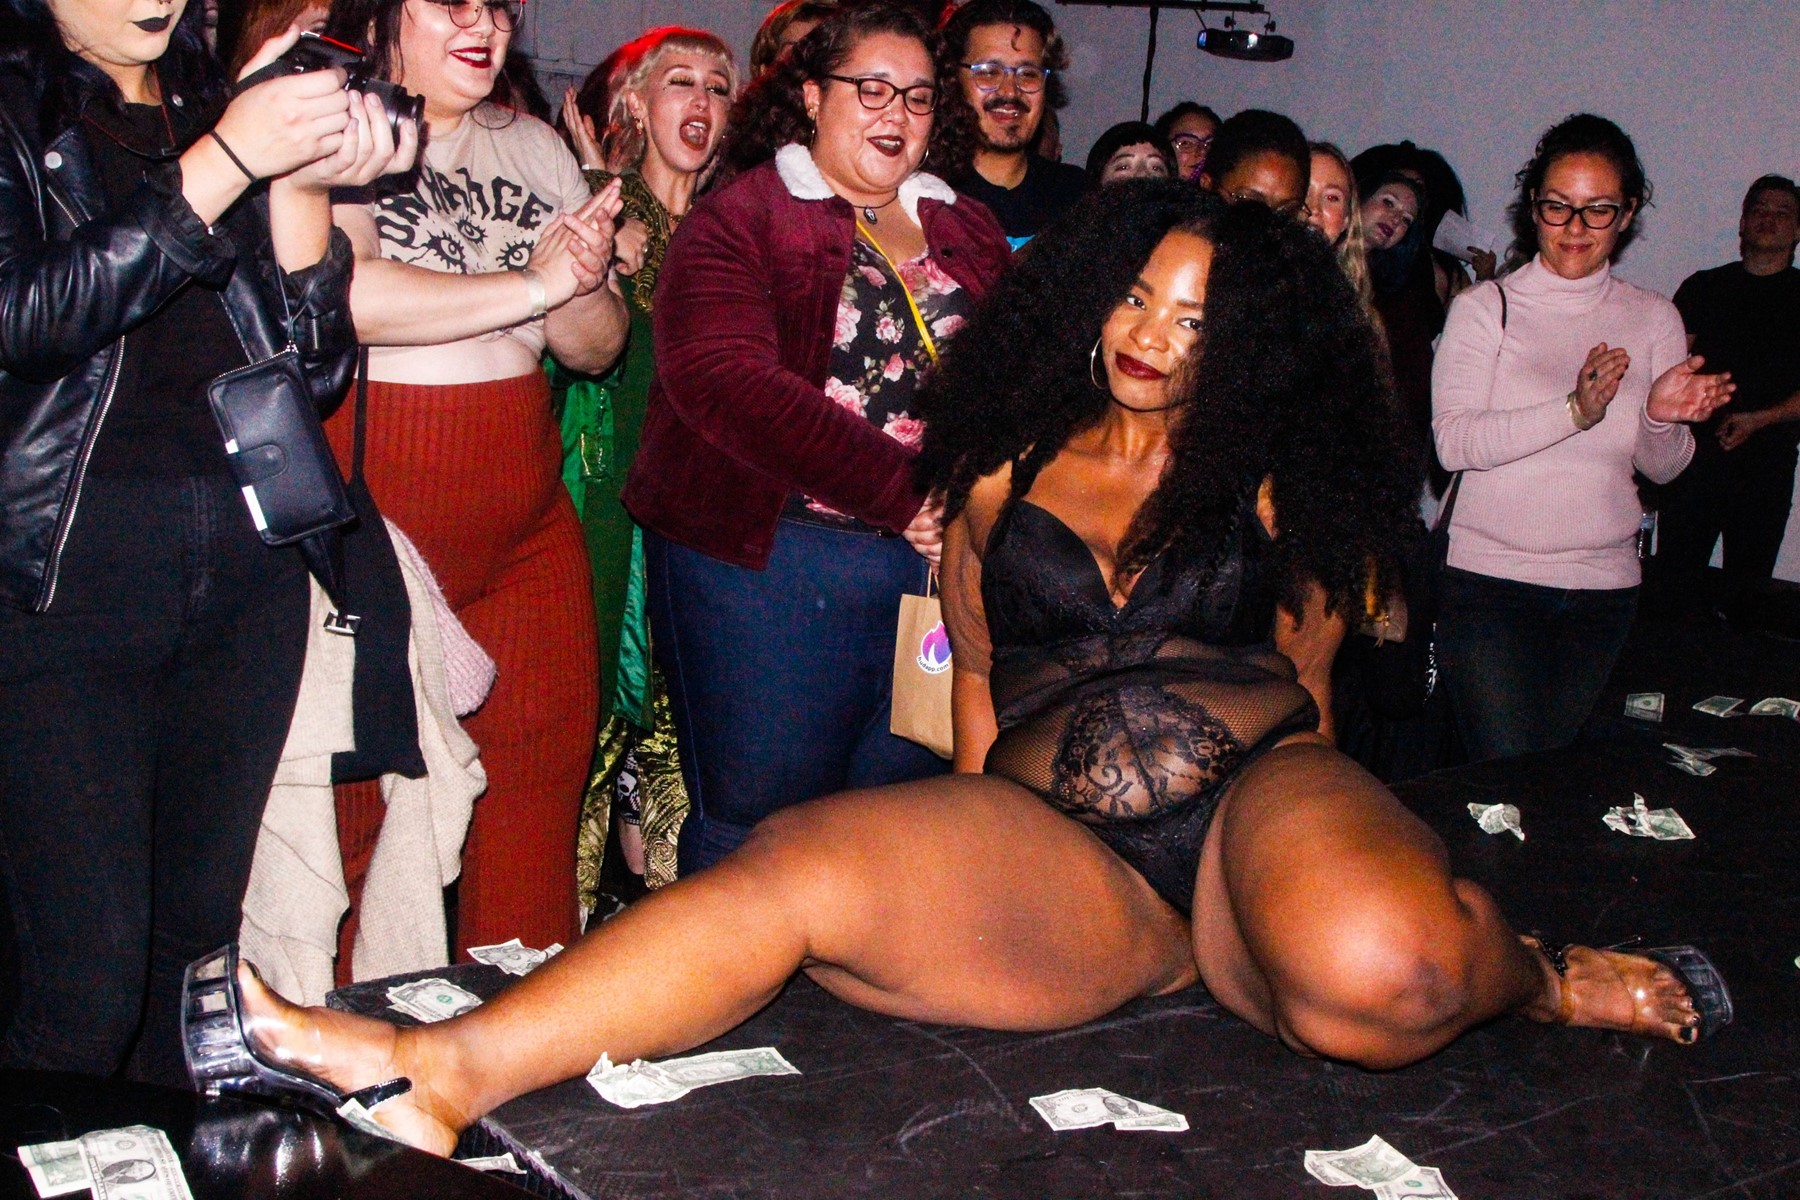 The body positive LA strip show founded by plus size women Dazed photo picture